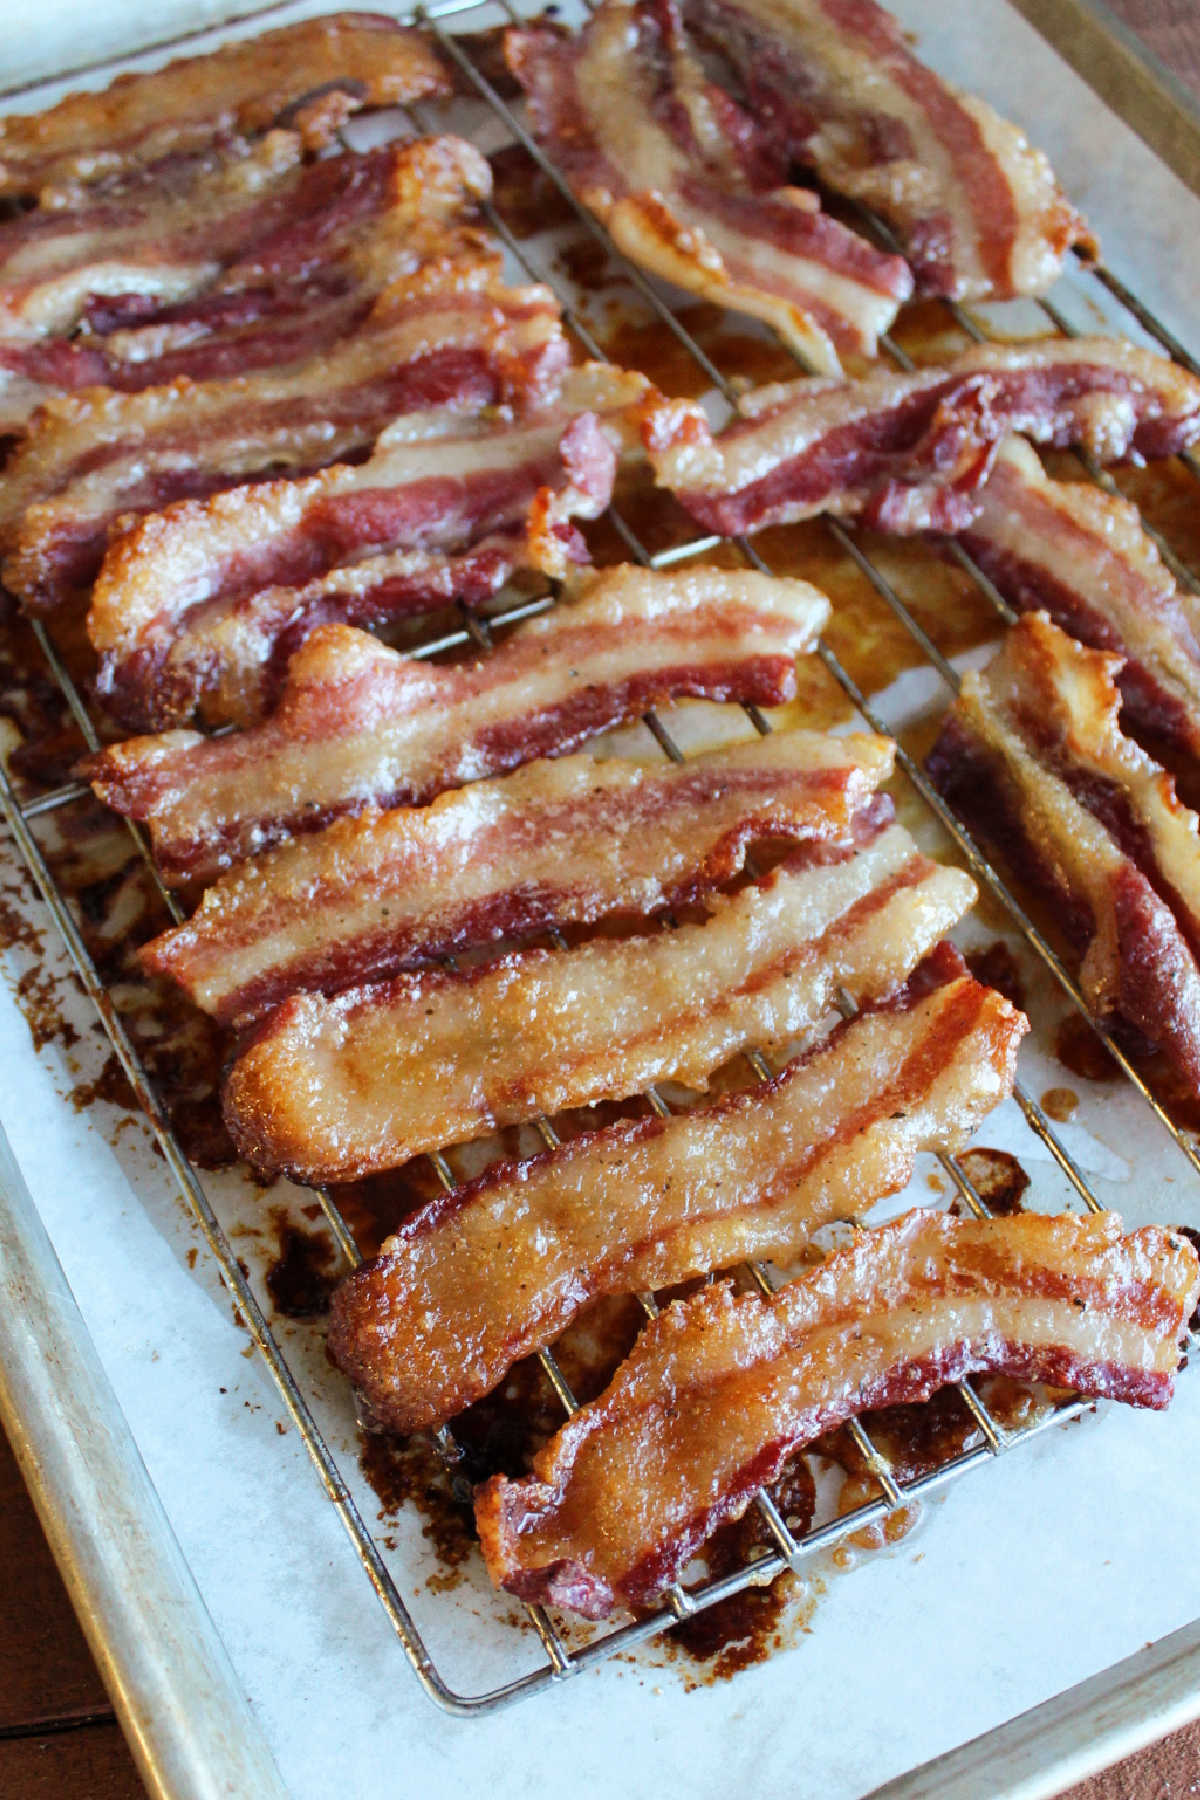 Maple glazed bacon fresh out of the oven.